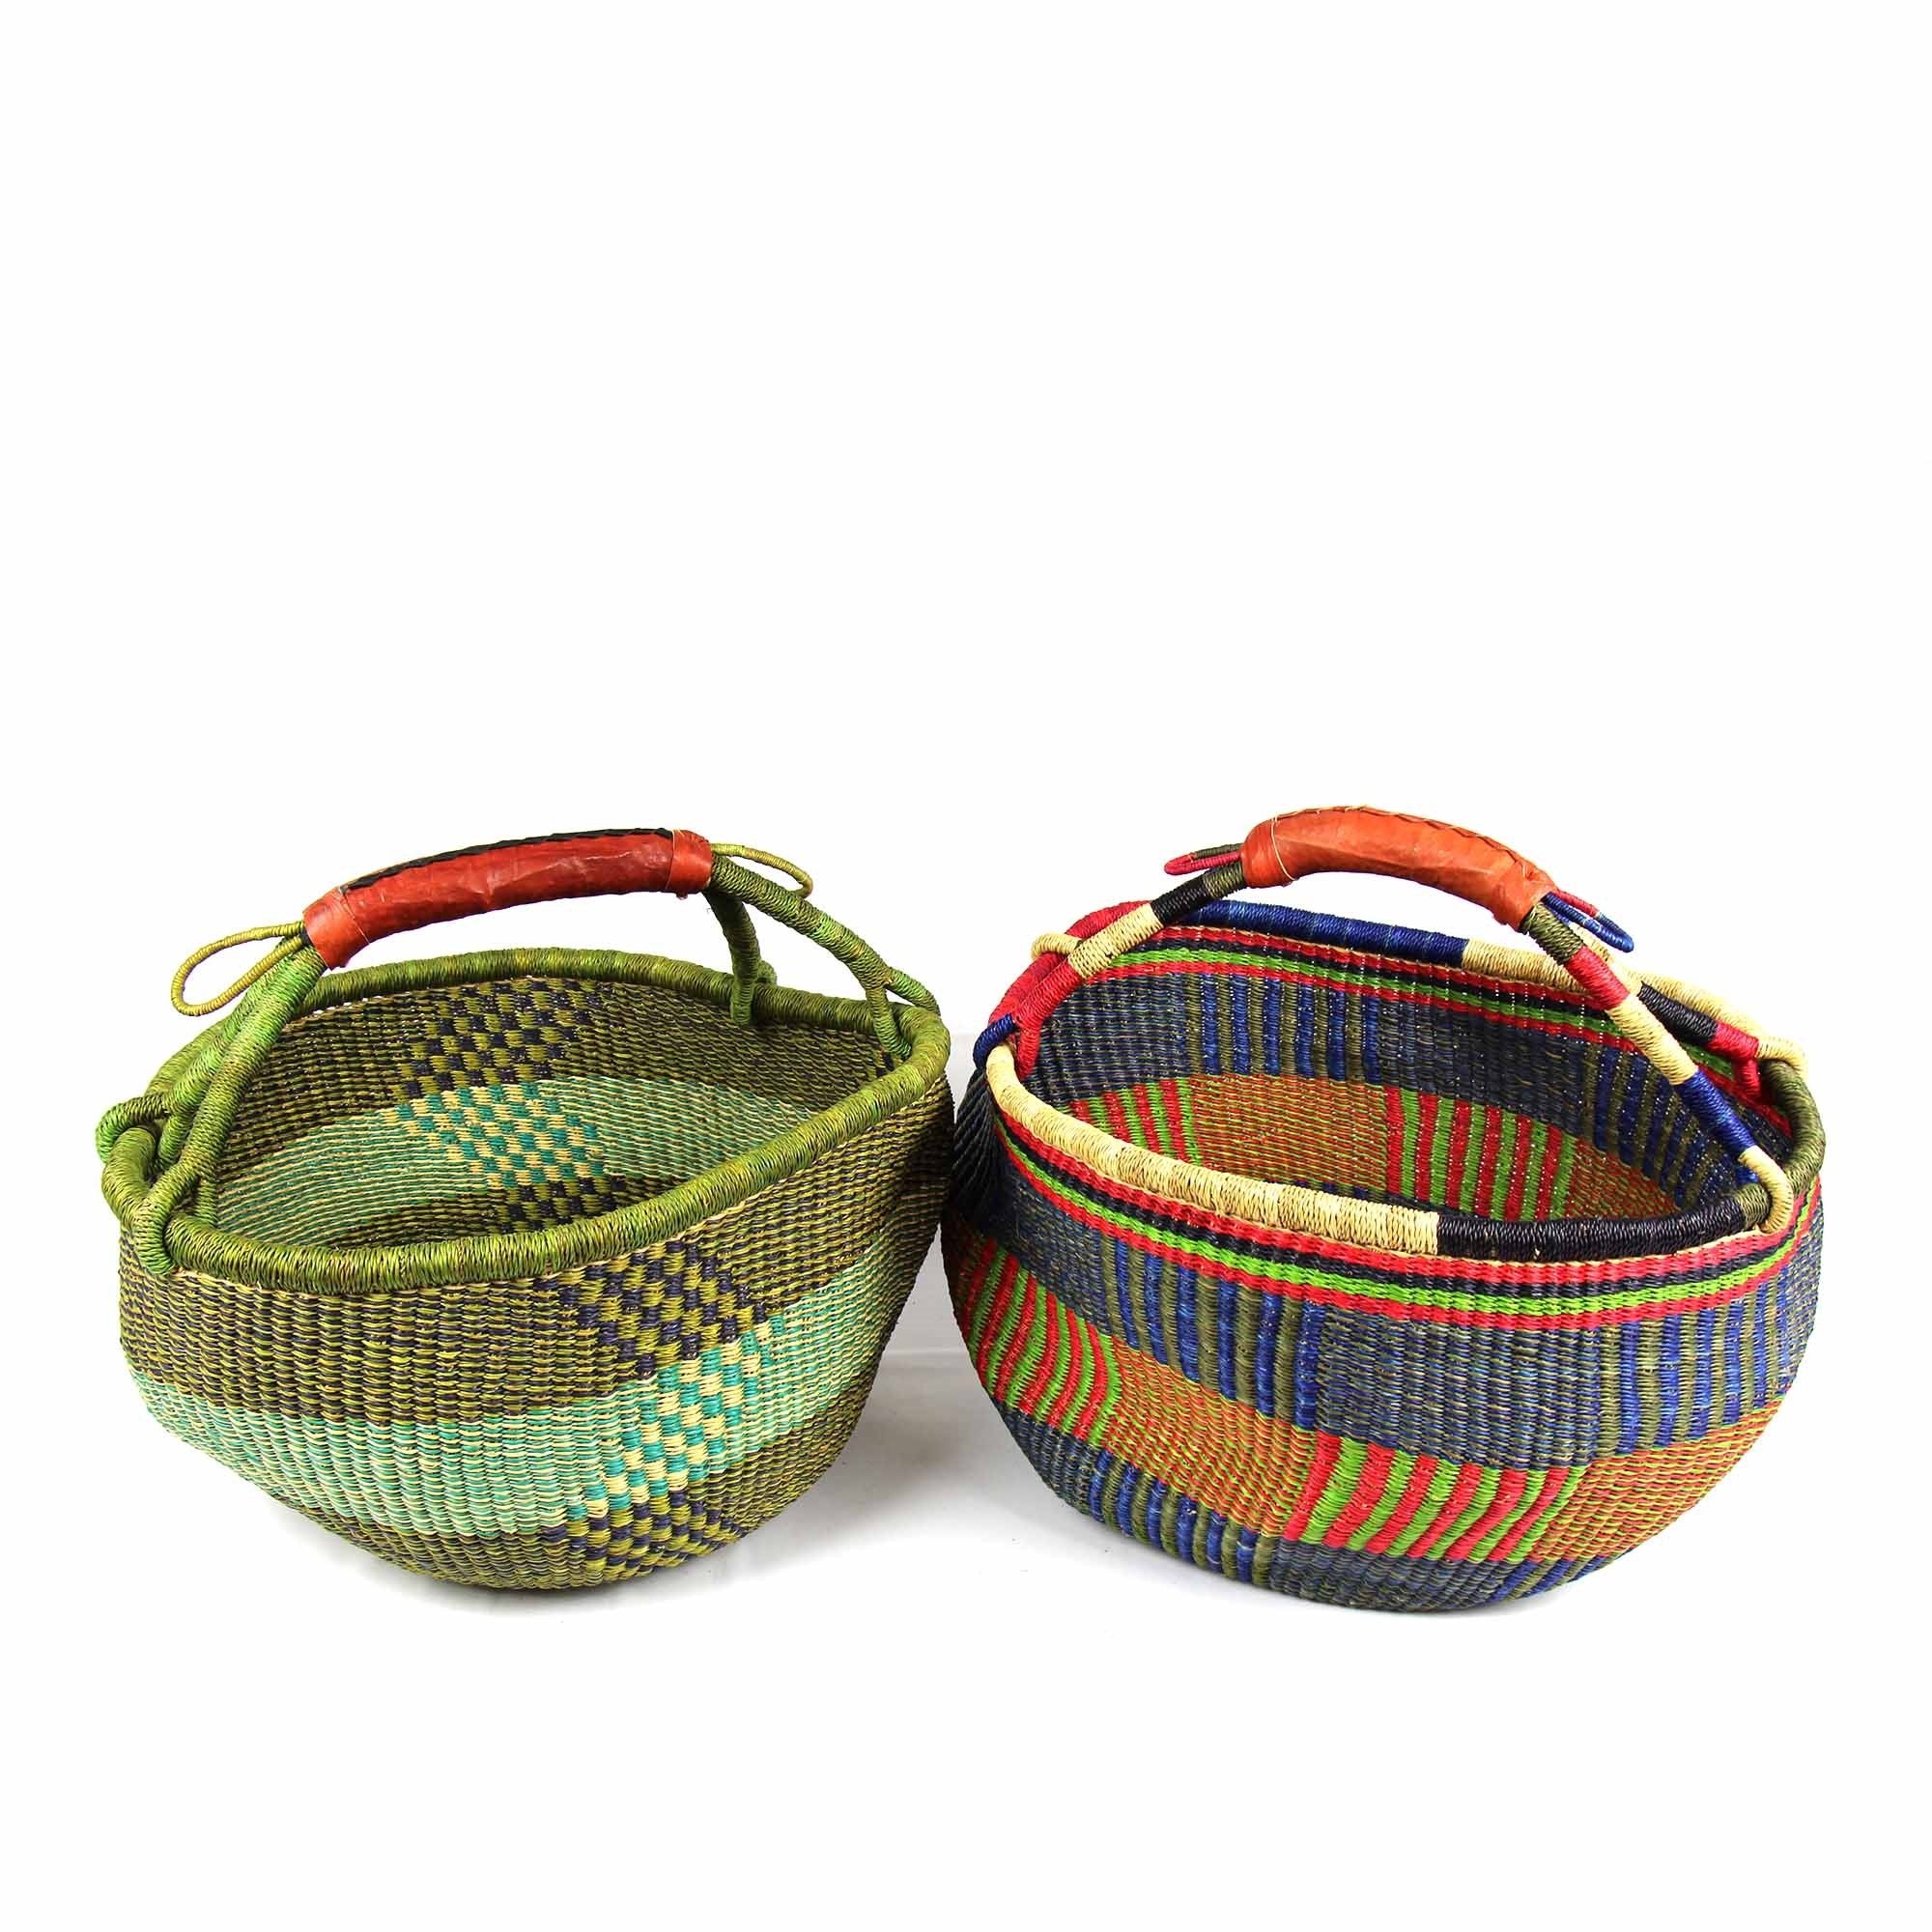 Woven Straw Tote Basket Colorful Wicker Market Basket Small 